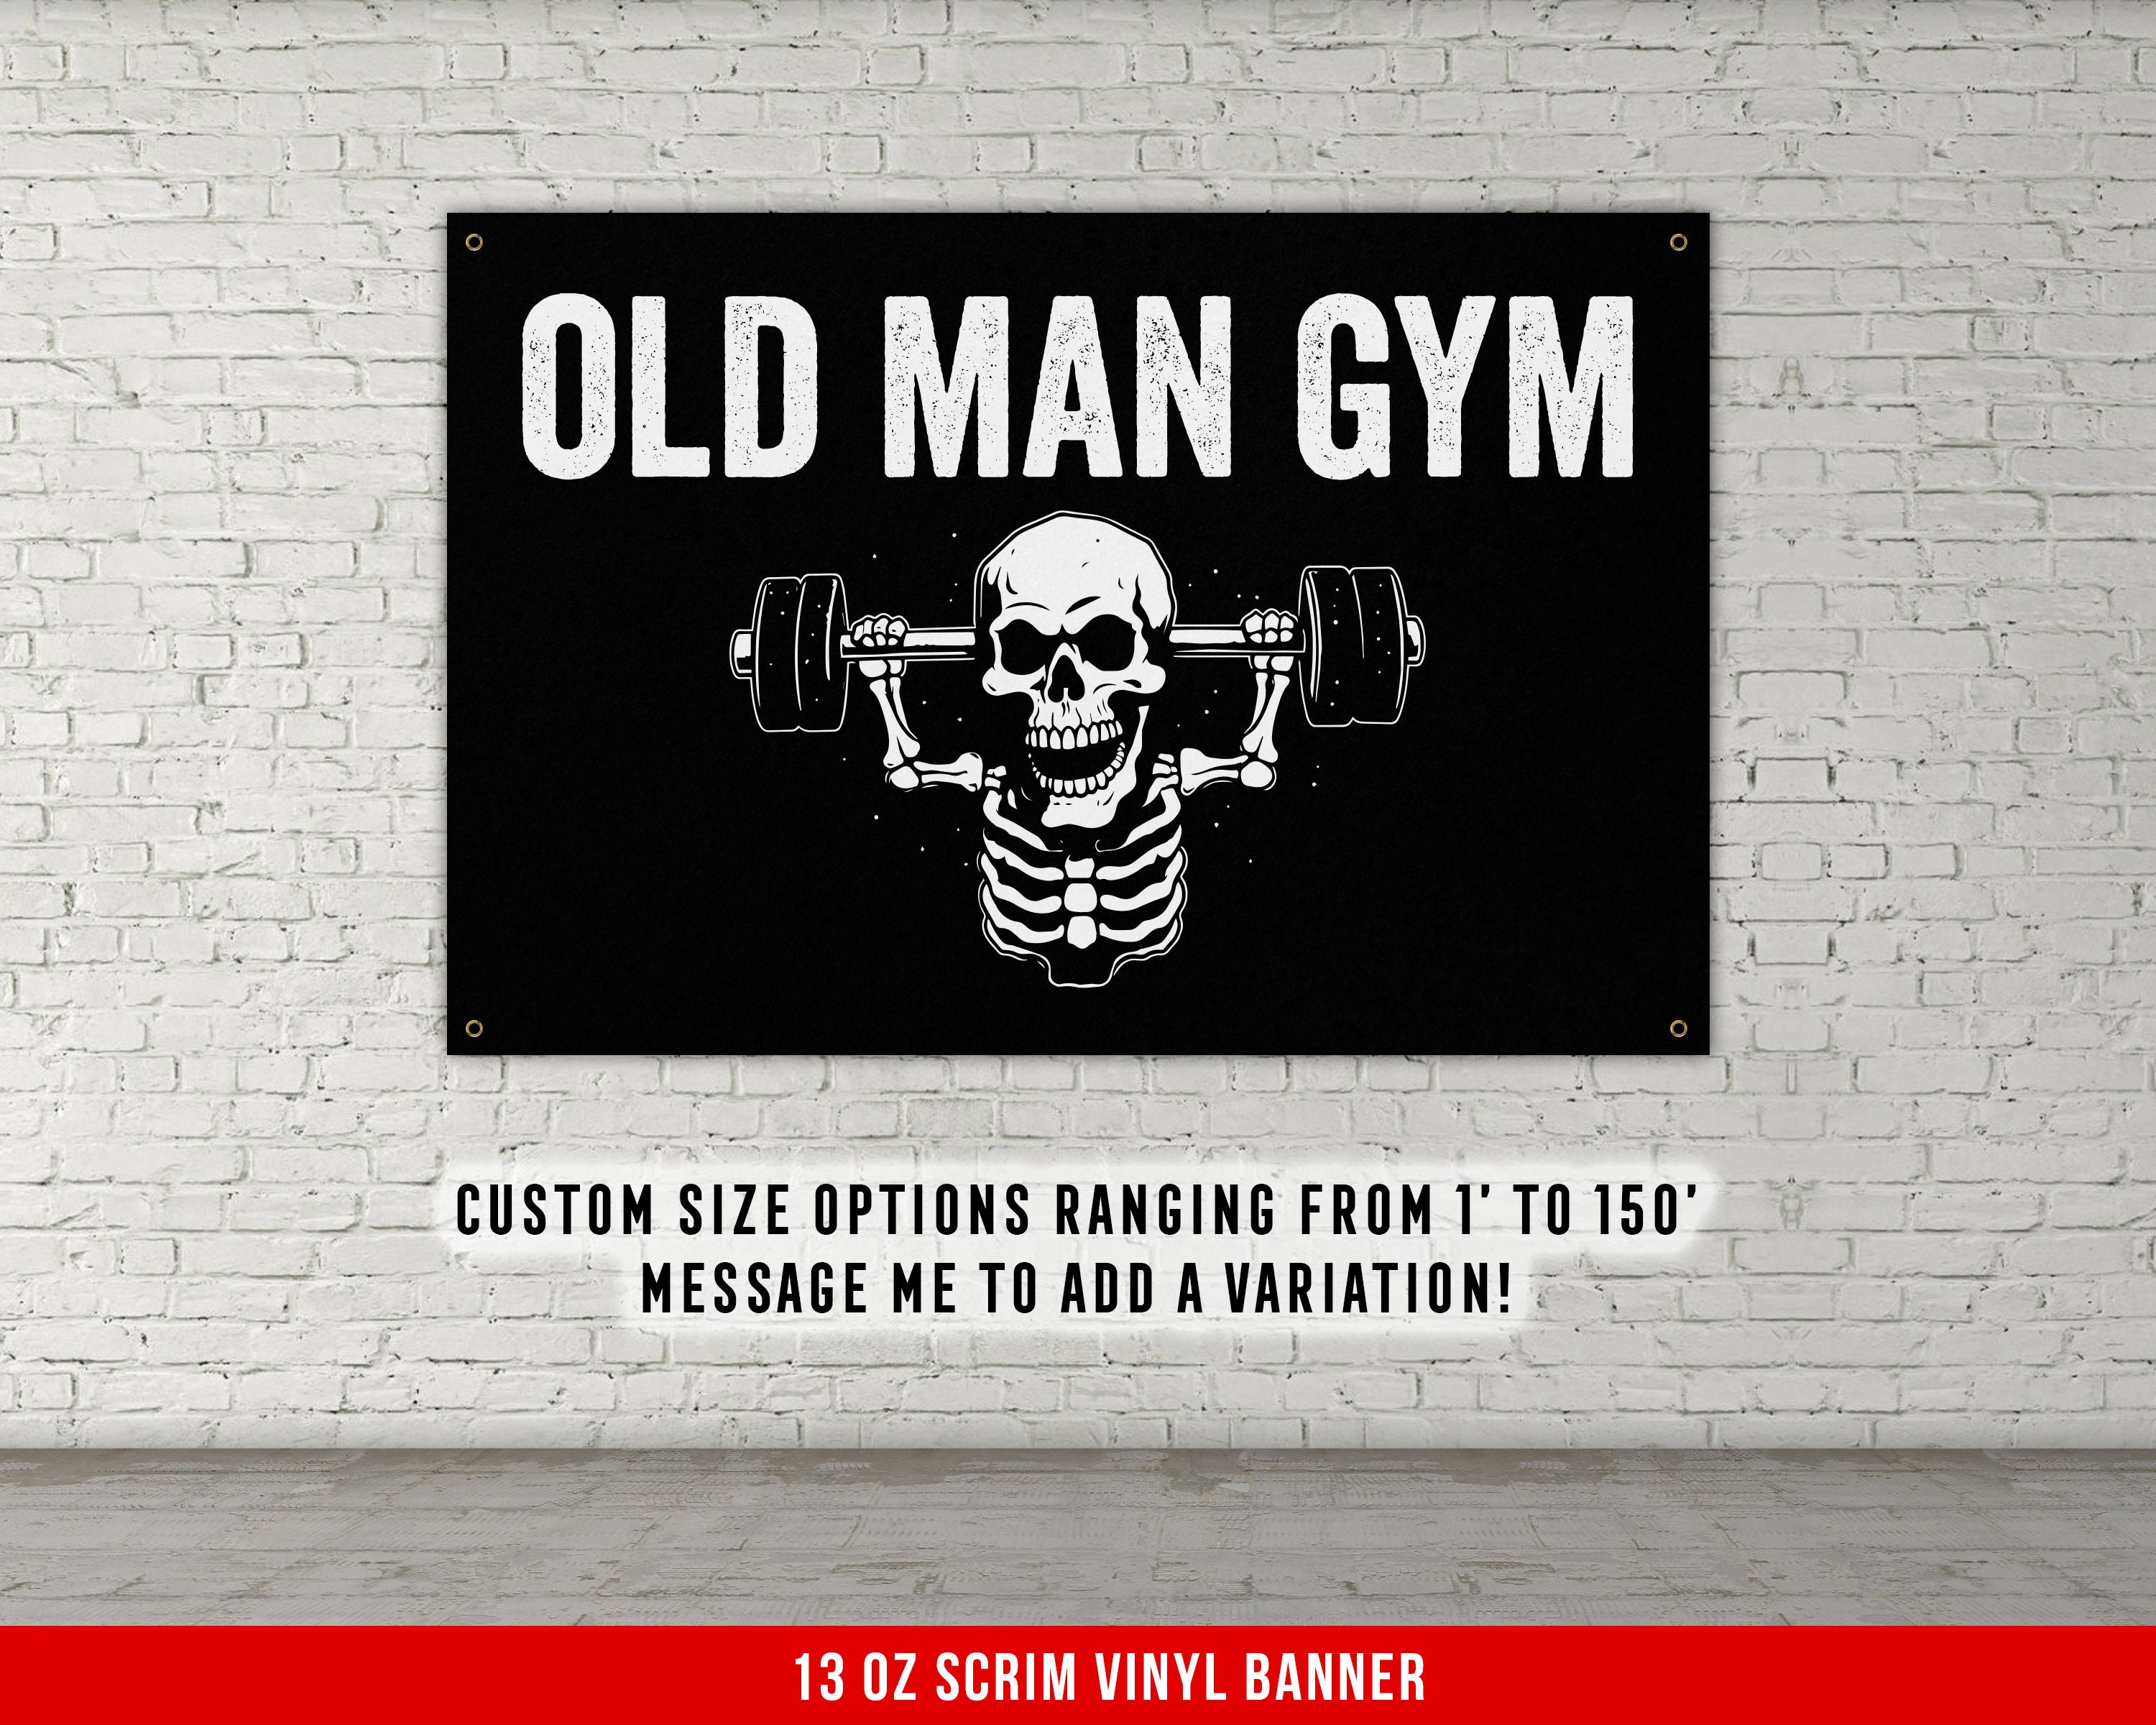 Old Man Gym Masters Division - Personalized Shirt - Birthday Gift for Fitness Lovers